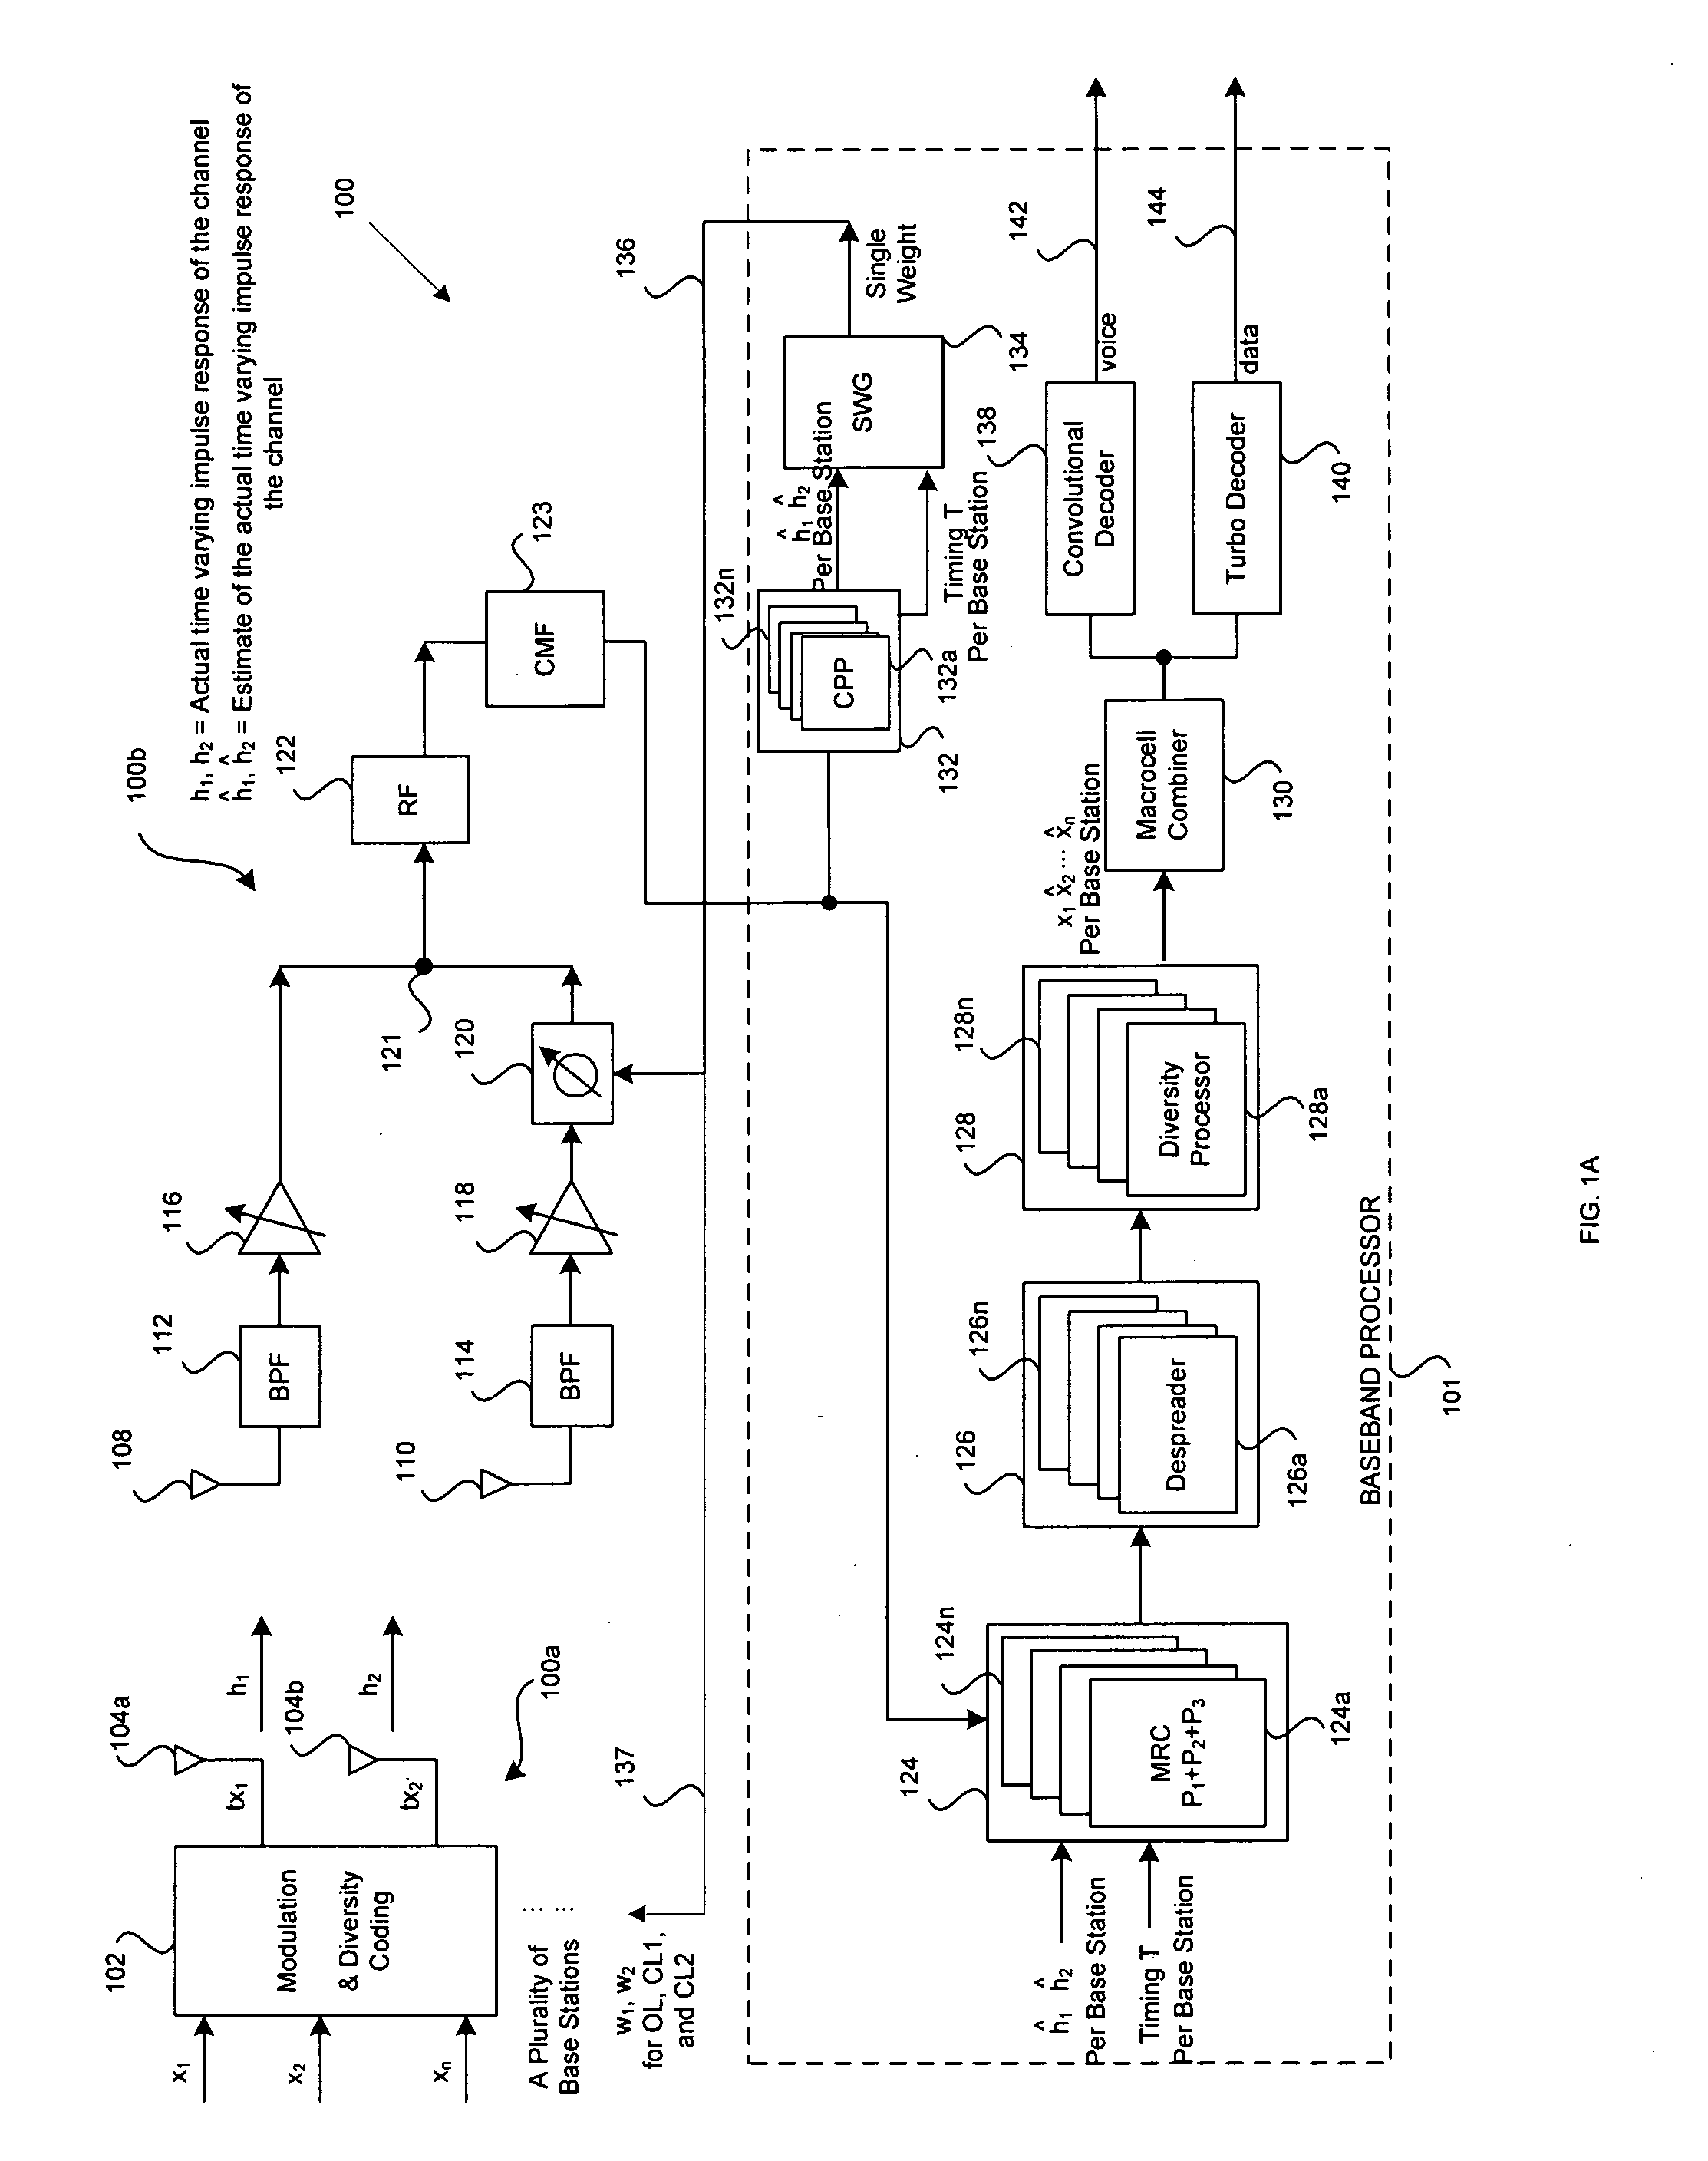 Method and system for single weight (SW) antenna system for single channel (SC) MIMO system for WCDMA